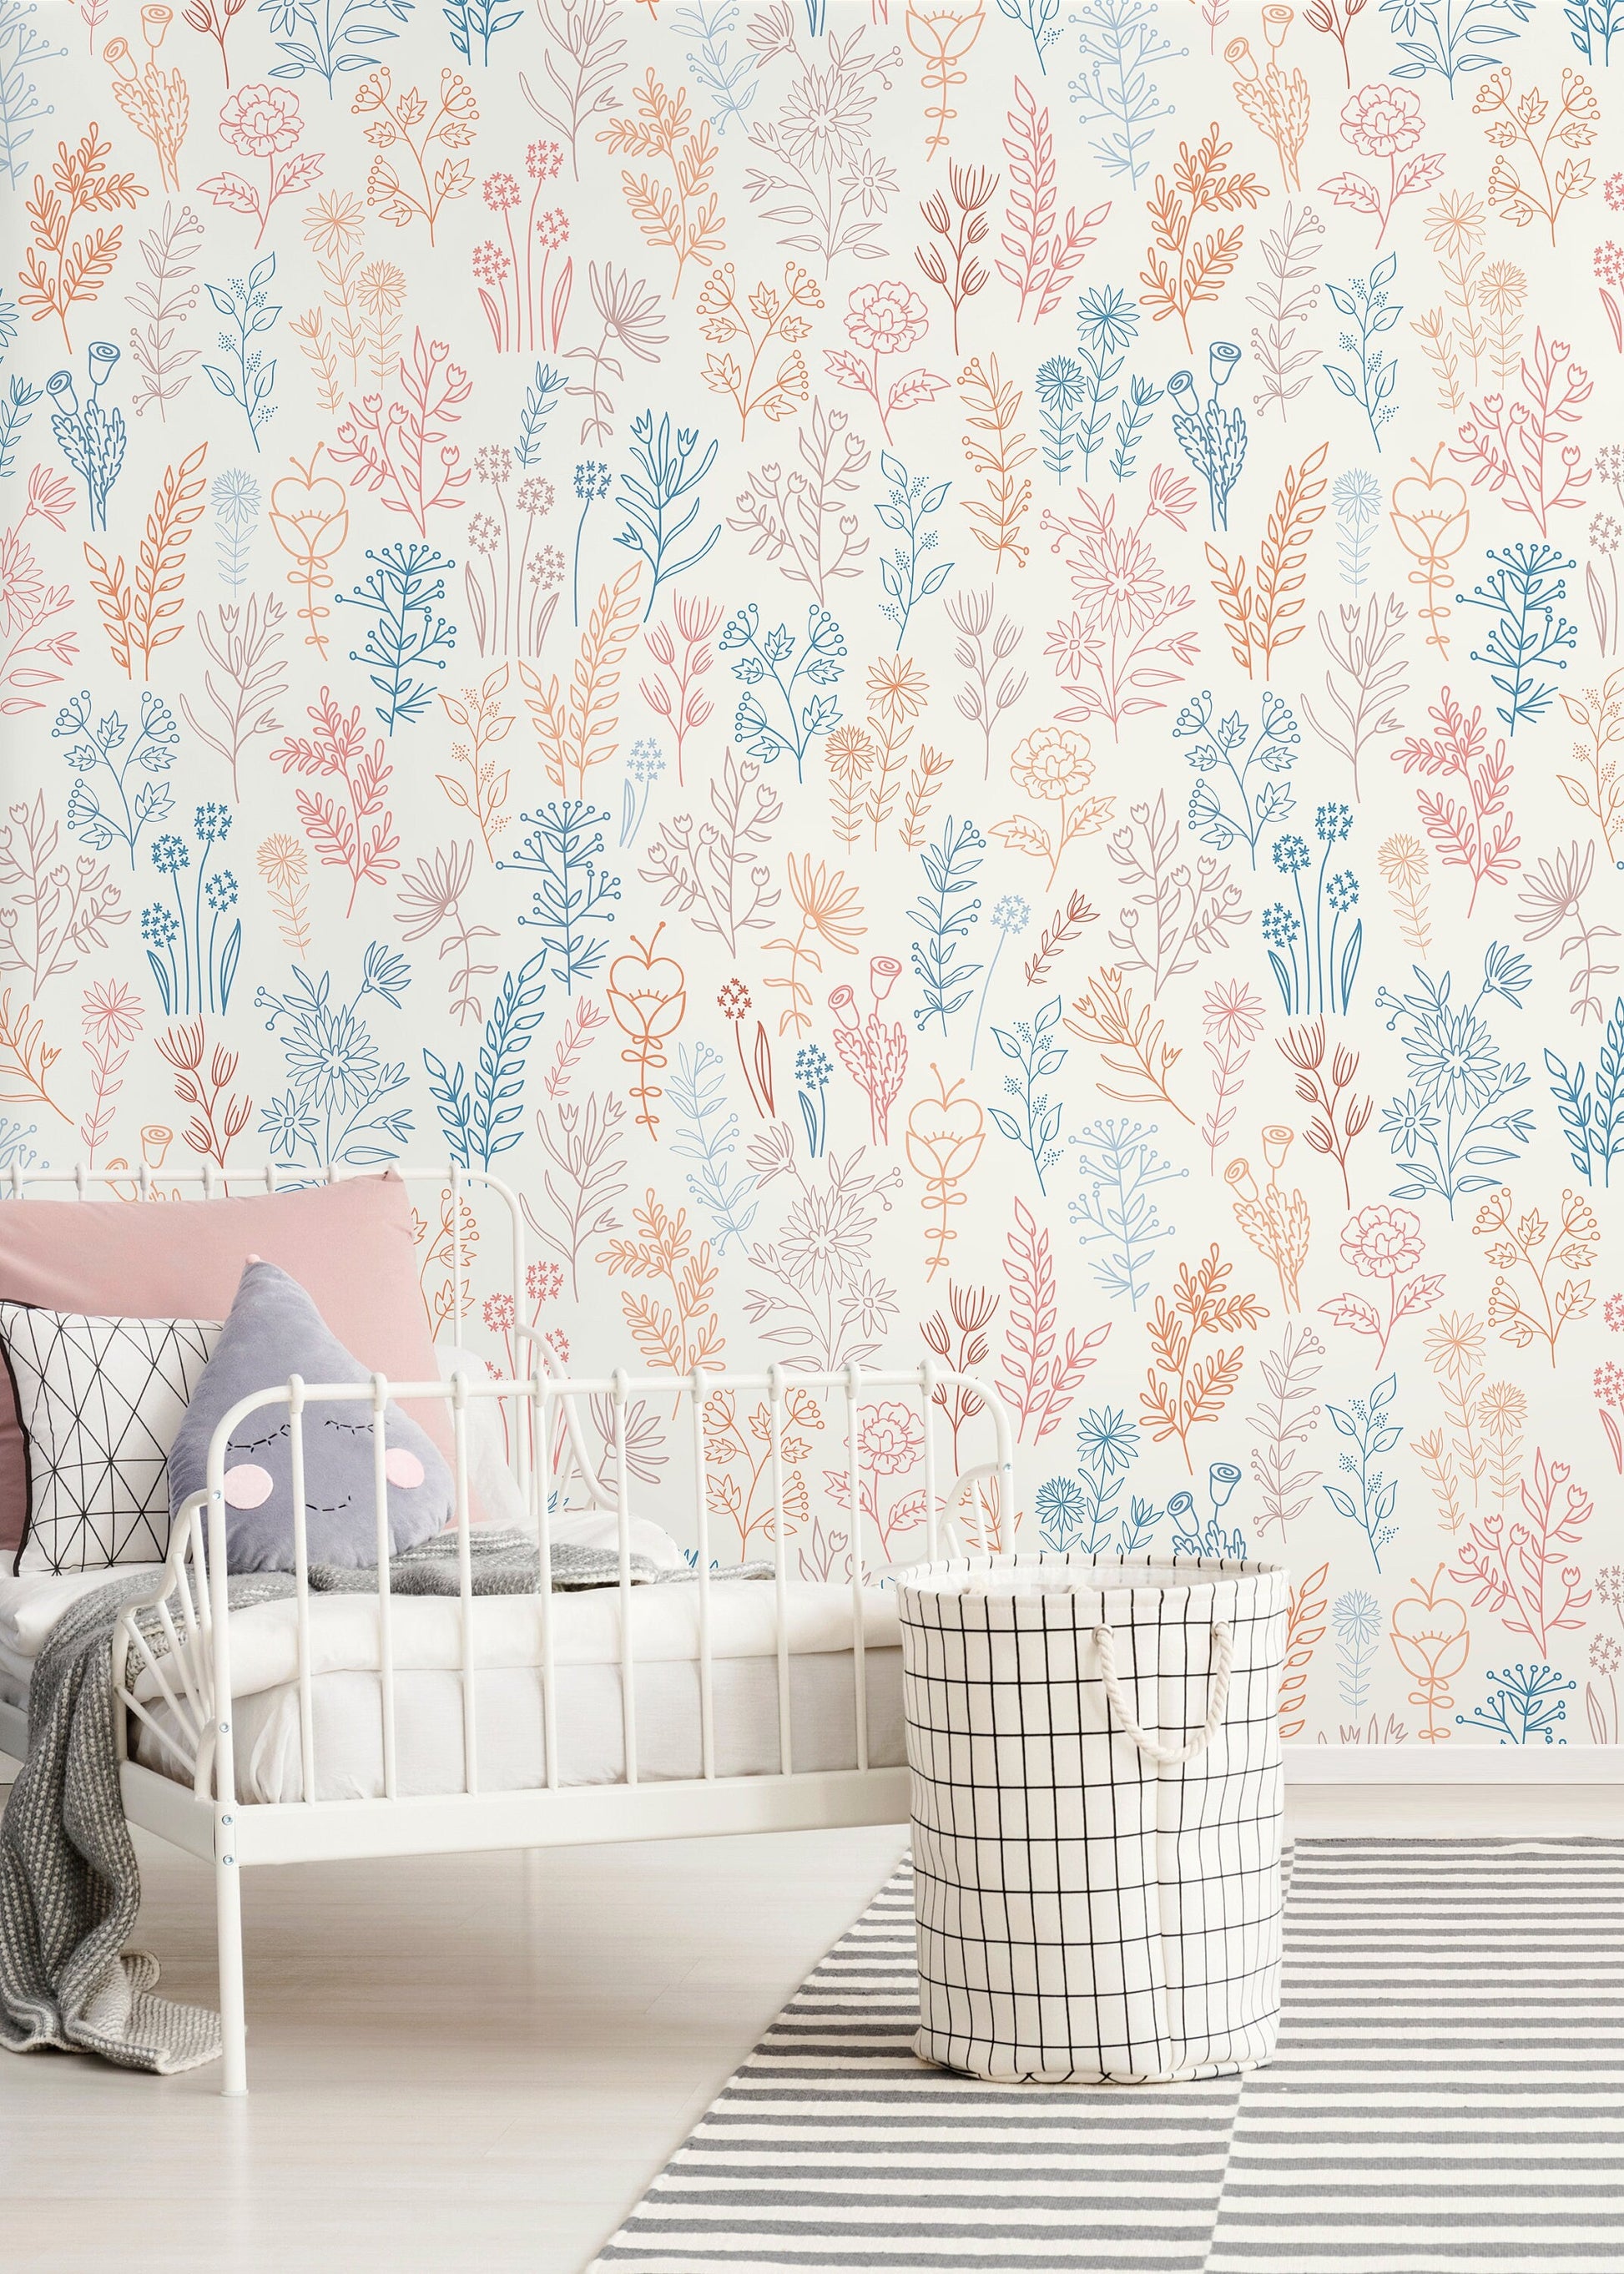 Cute Floral Wildflowers Wallpaper / Peel and Stick Wallpaper Removable Wallpaper Home Decor Wall Art Wall Decor Room Decor - D235